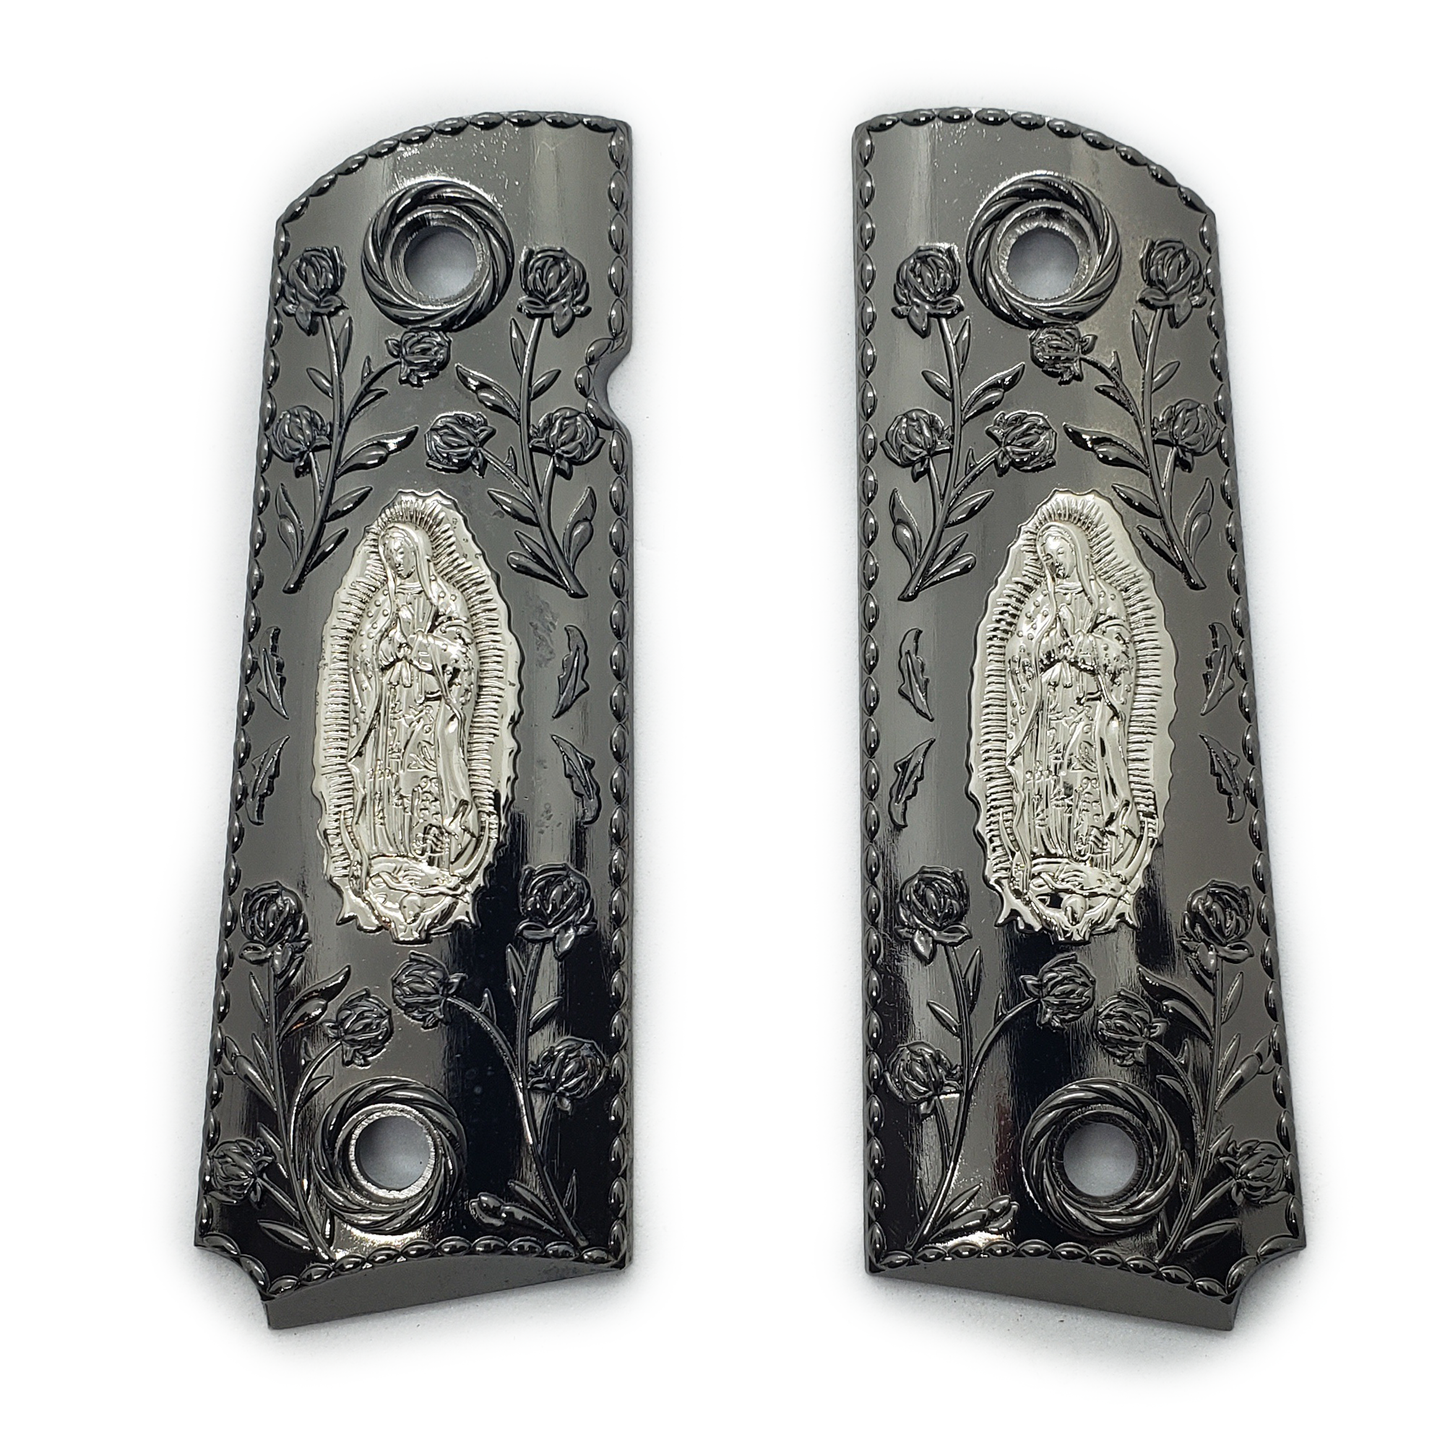 1911 GRIPS FULL SIZE - Metal - Virgin Mary Scroll W Ambi Safety #T-VM02